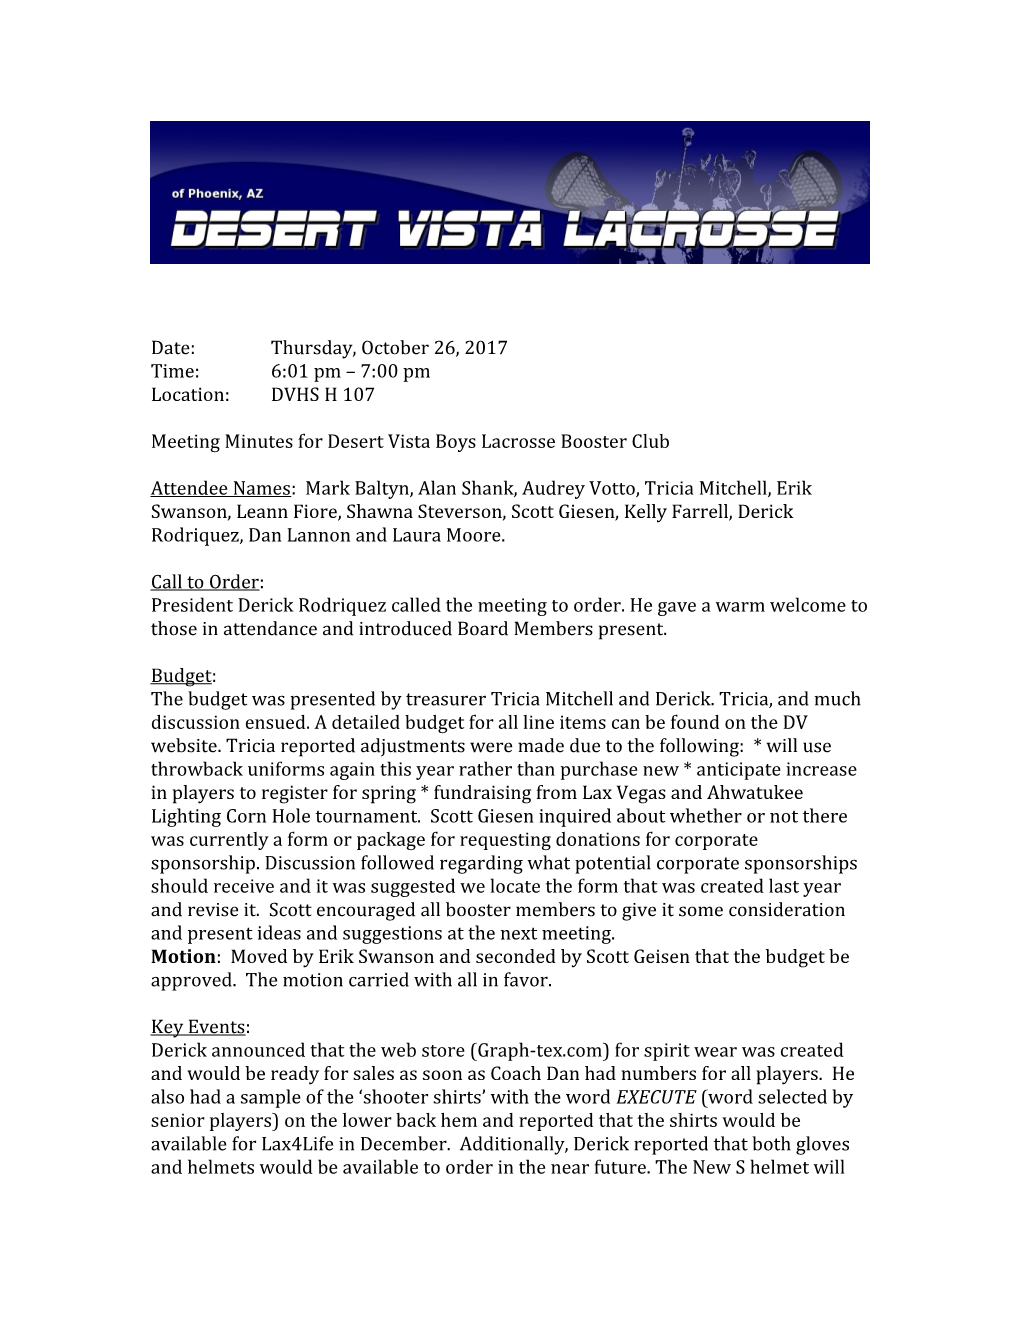 Meeting Minutes for Desert Vista Boys Lacrosse Booster Club